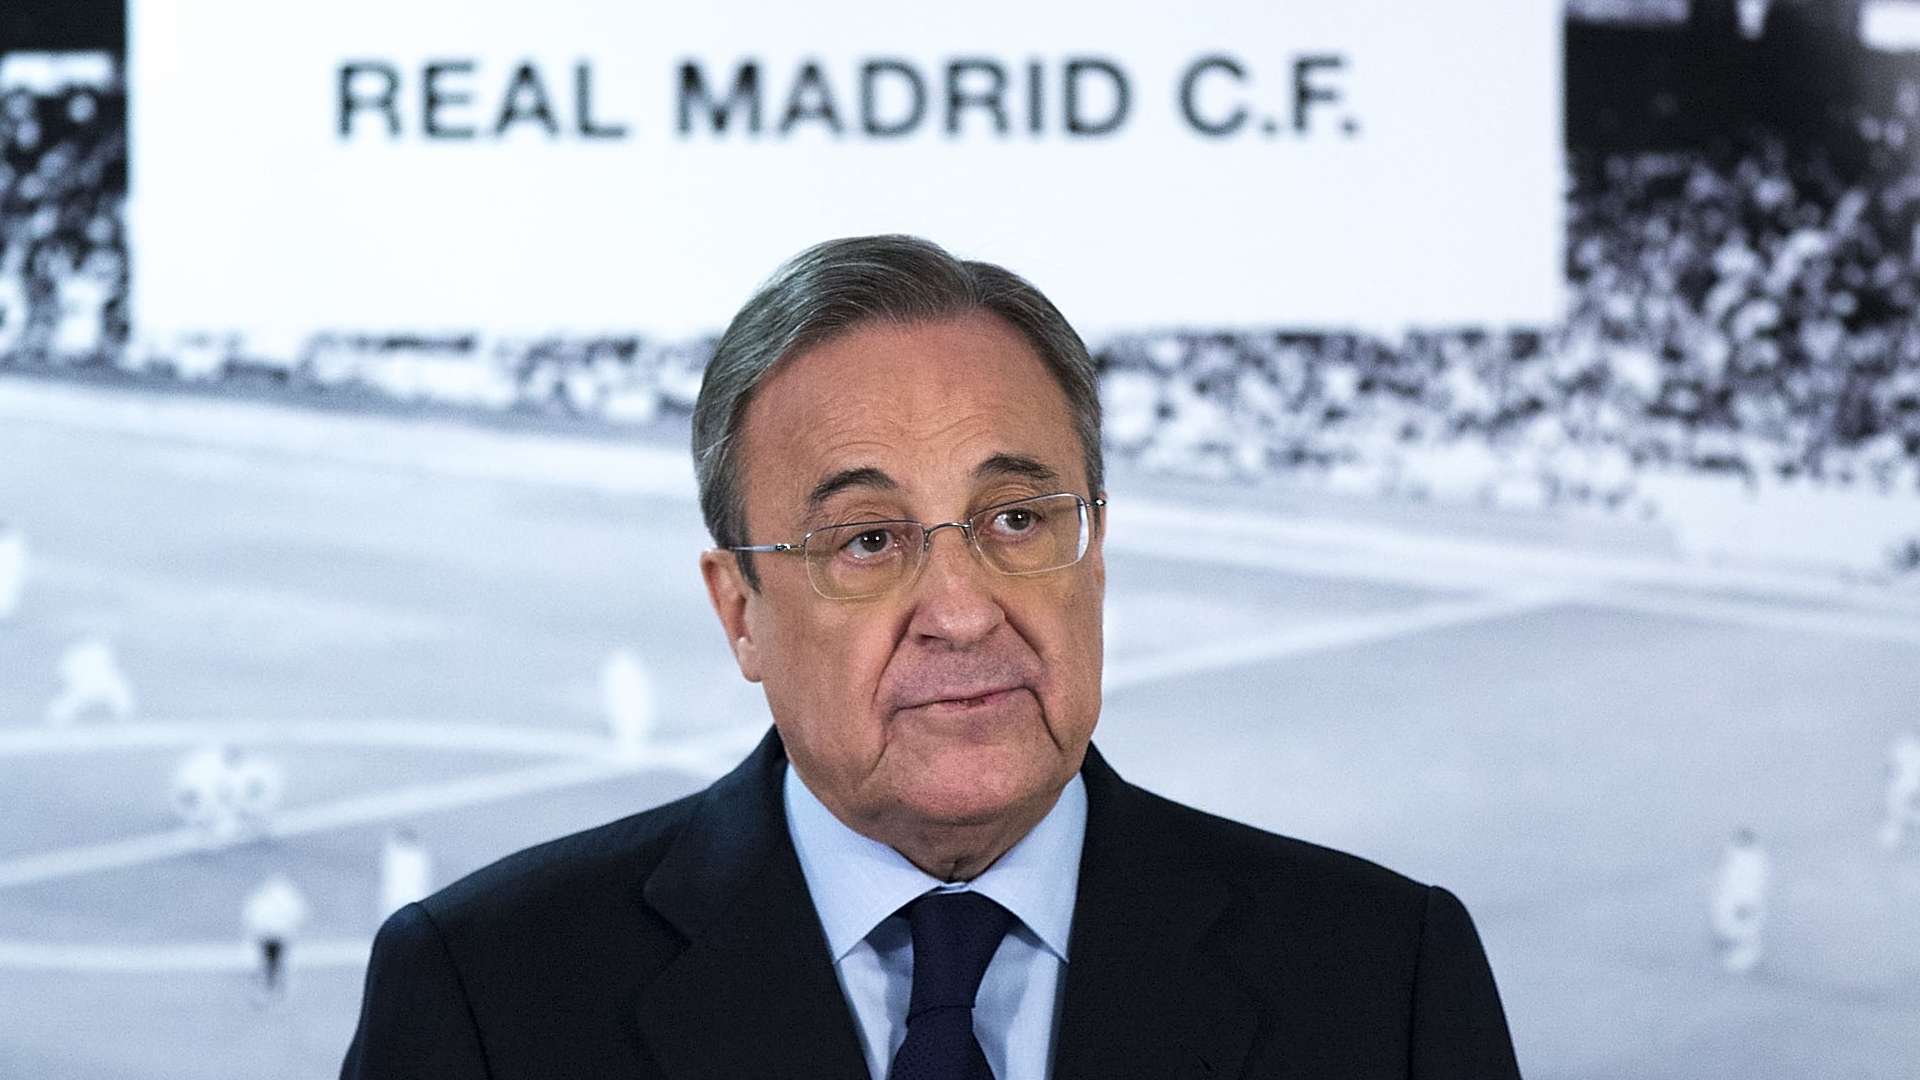 Who is Florentino Perez and what is the Real Madrid president's net worth?